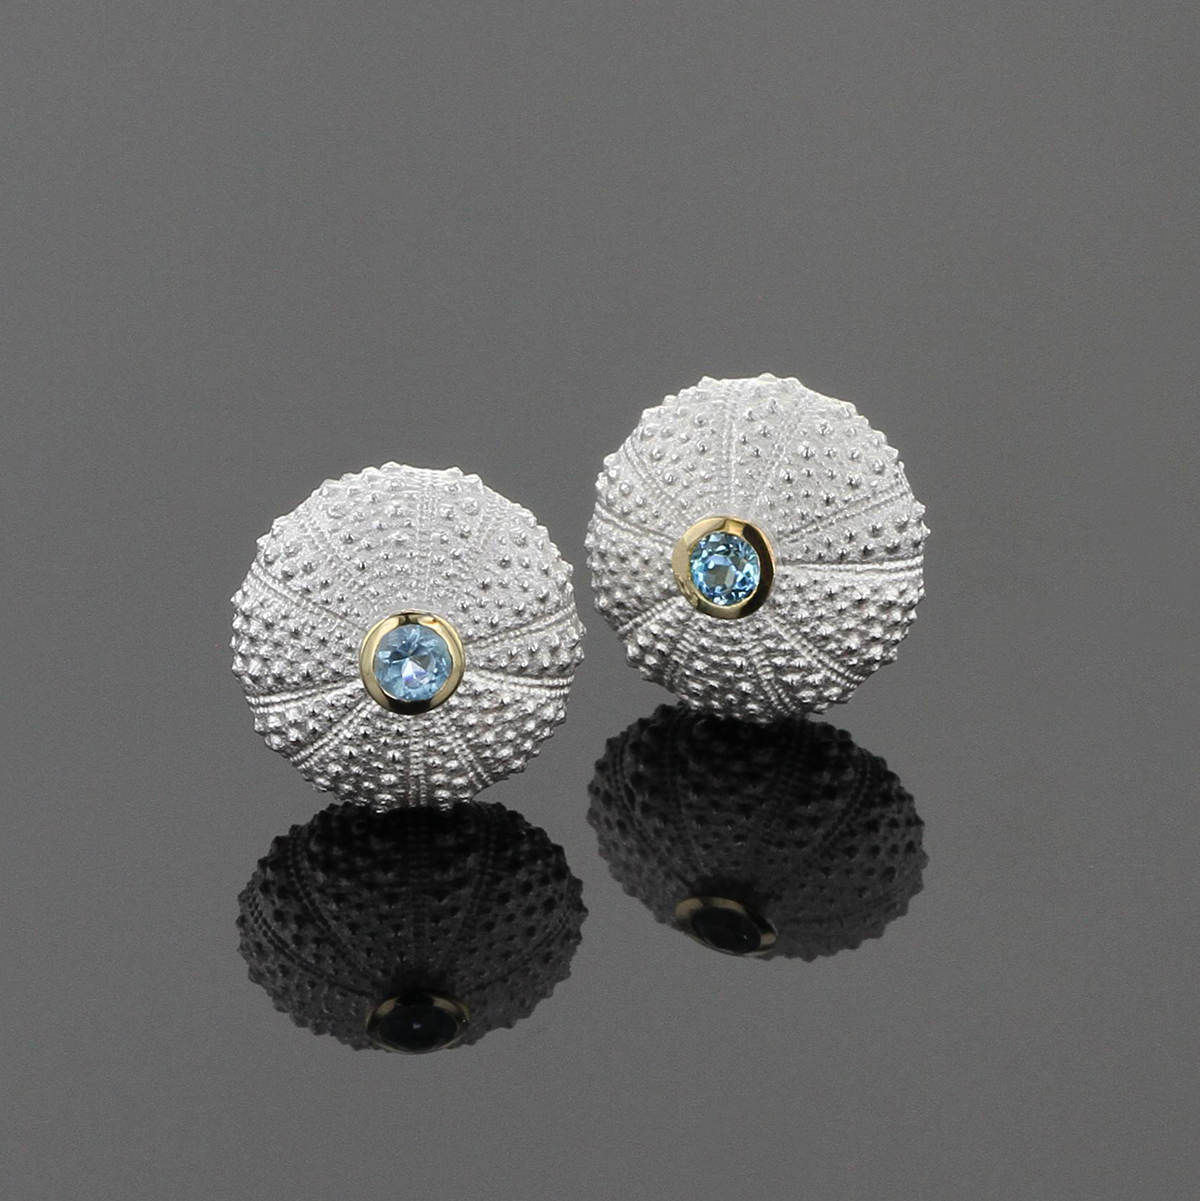 Tiny sea urchin earrings in sterling silver with a Blue Topas stone in a yellow gold setting at its center.